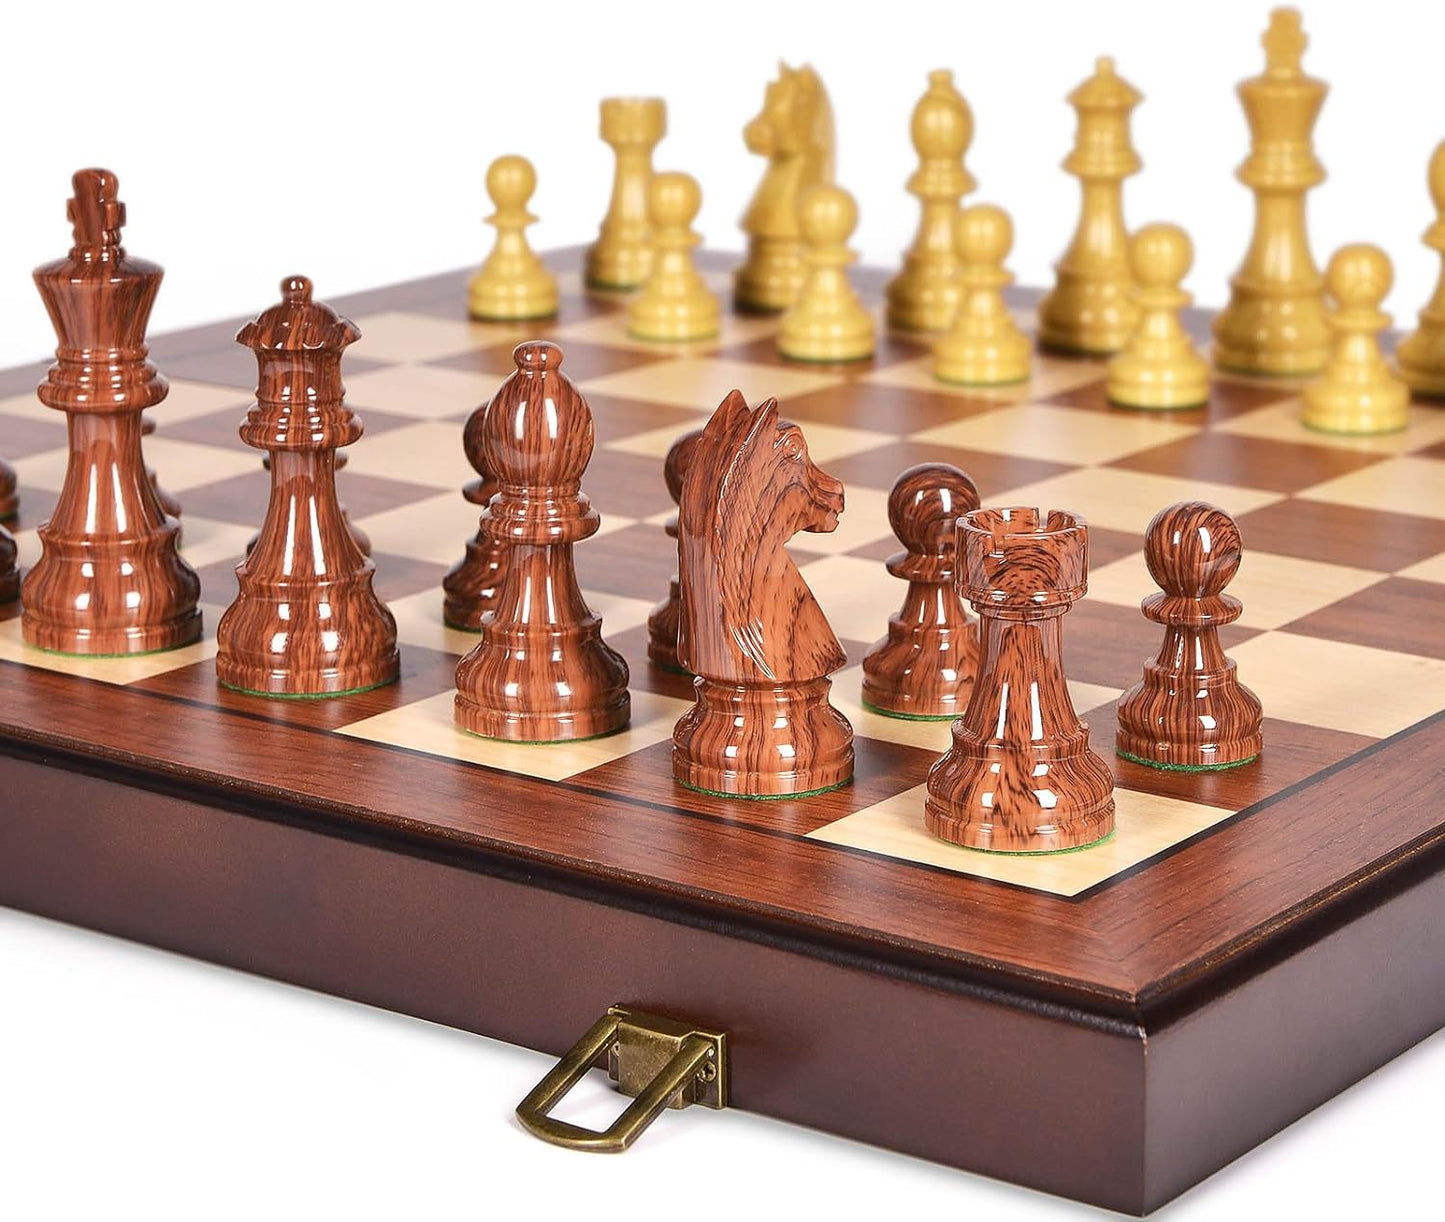 AMEROUR 20'' x 20'' Wooden Chess Set with High Polymer Weighted Chess Pieces / 3.75'' King / 2 Extra Queens/Larger Size Folding Board, Chess Board Game for Adults